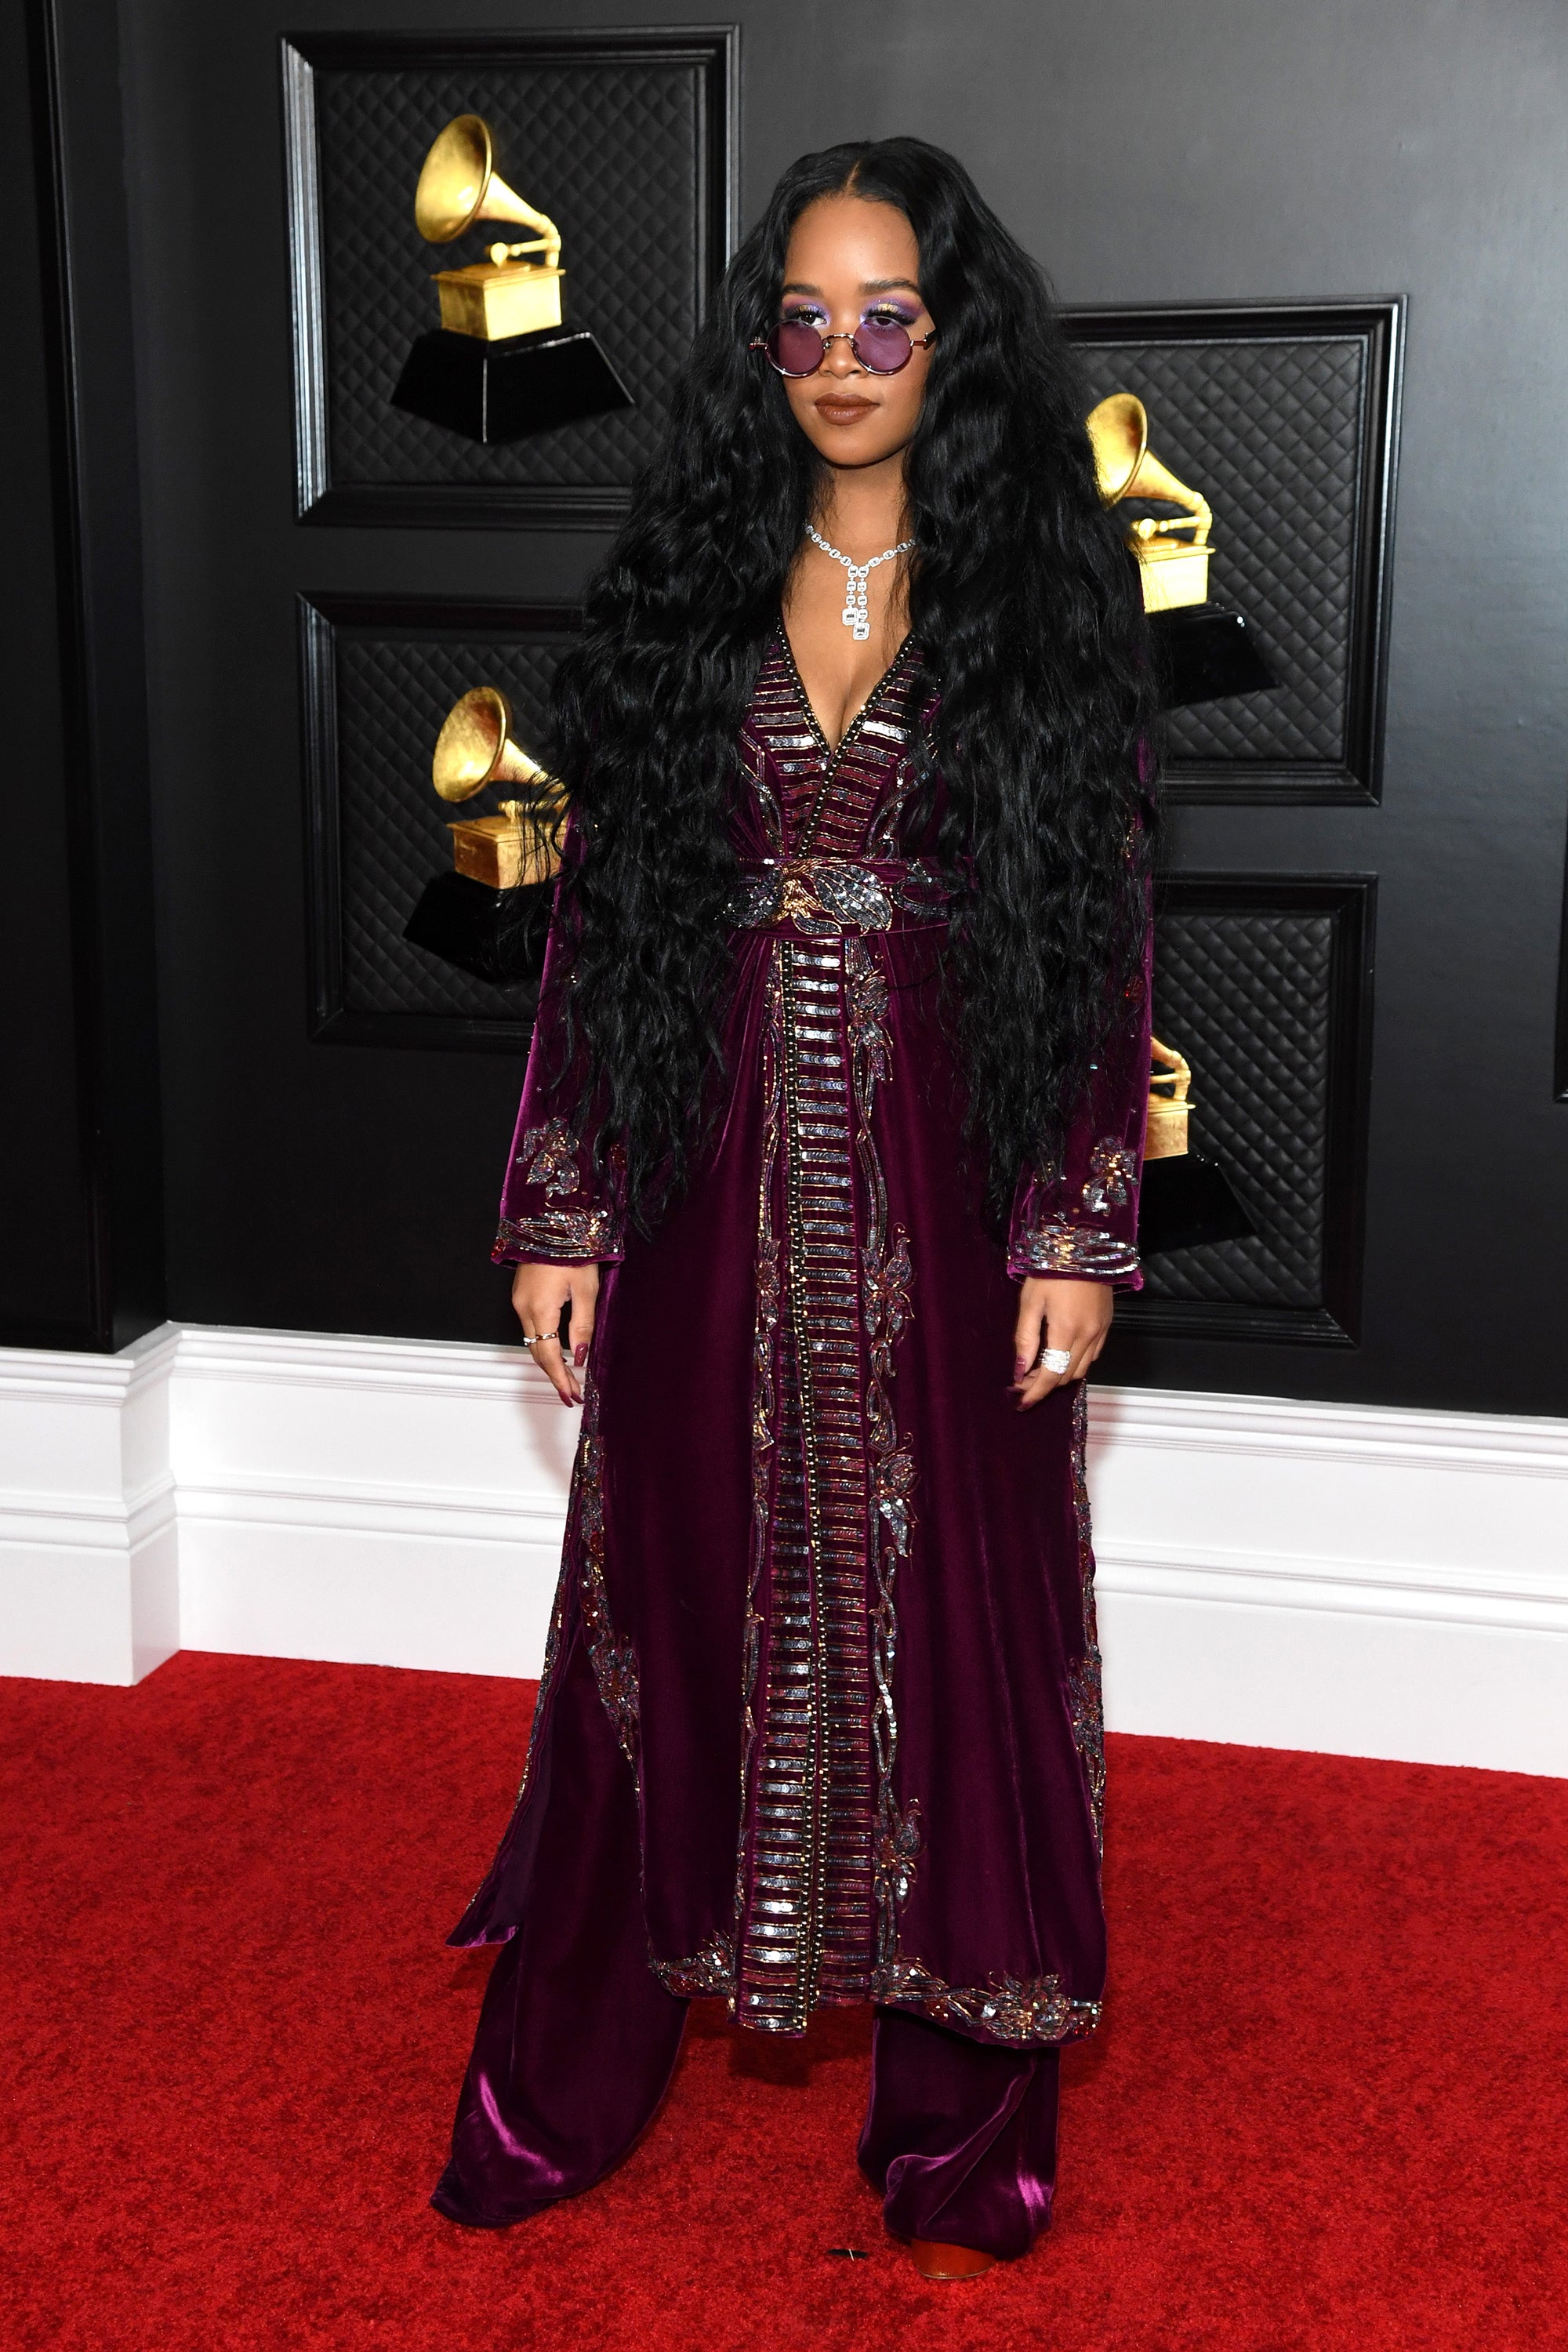 Grammys 2021 Best Dressed List – The Hollywood Reporter